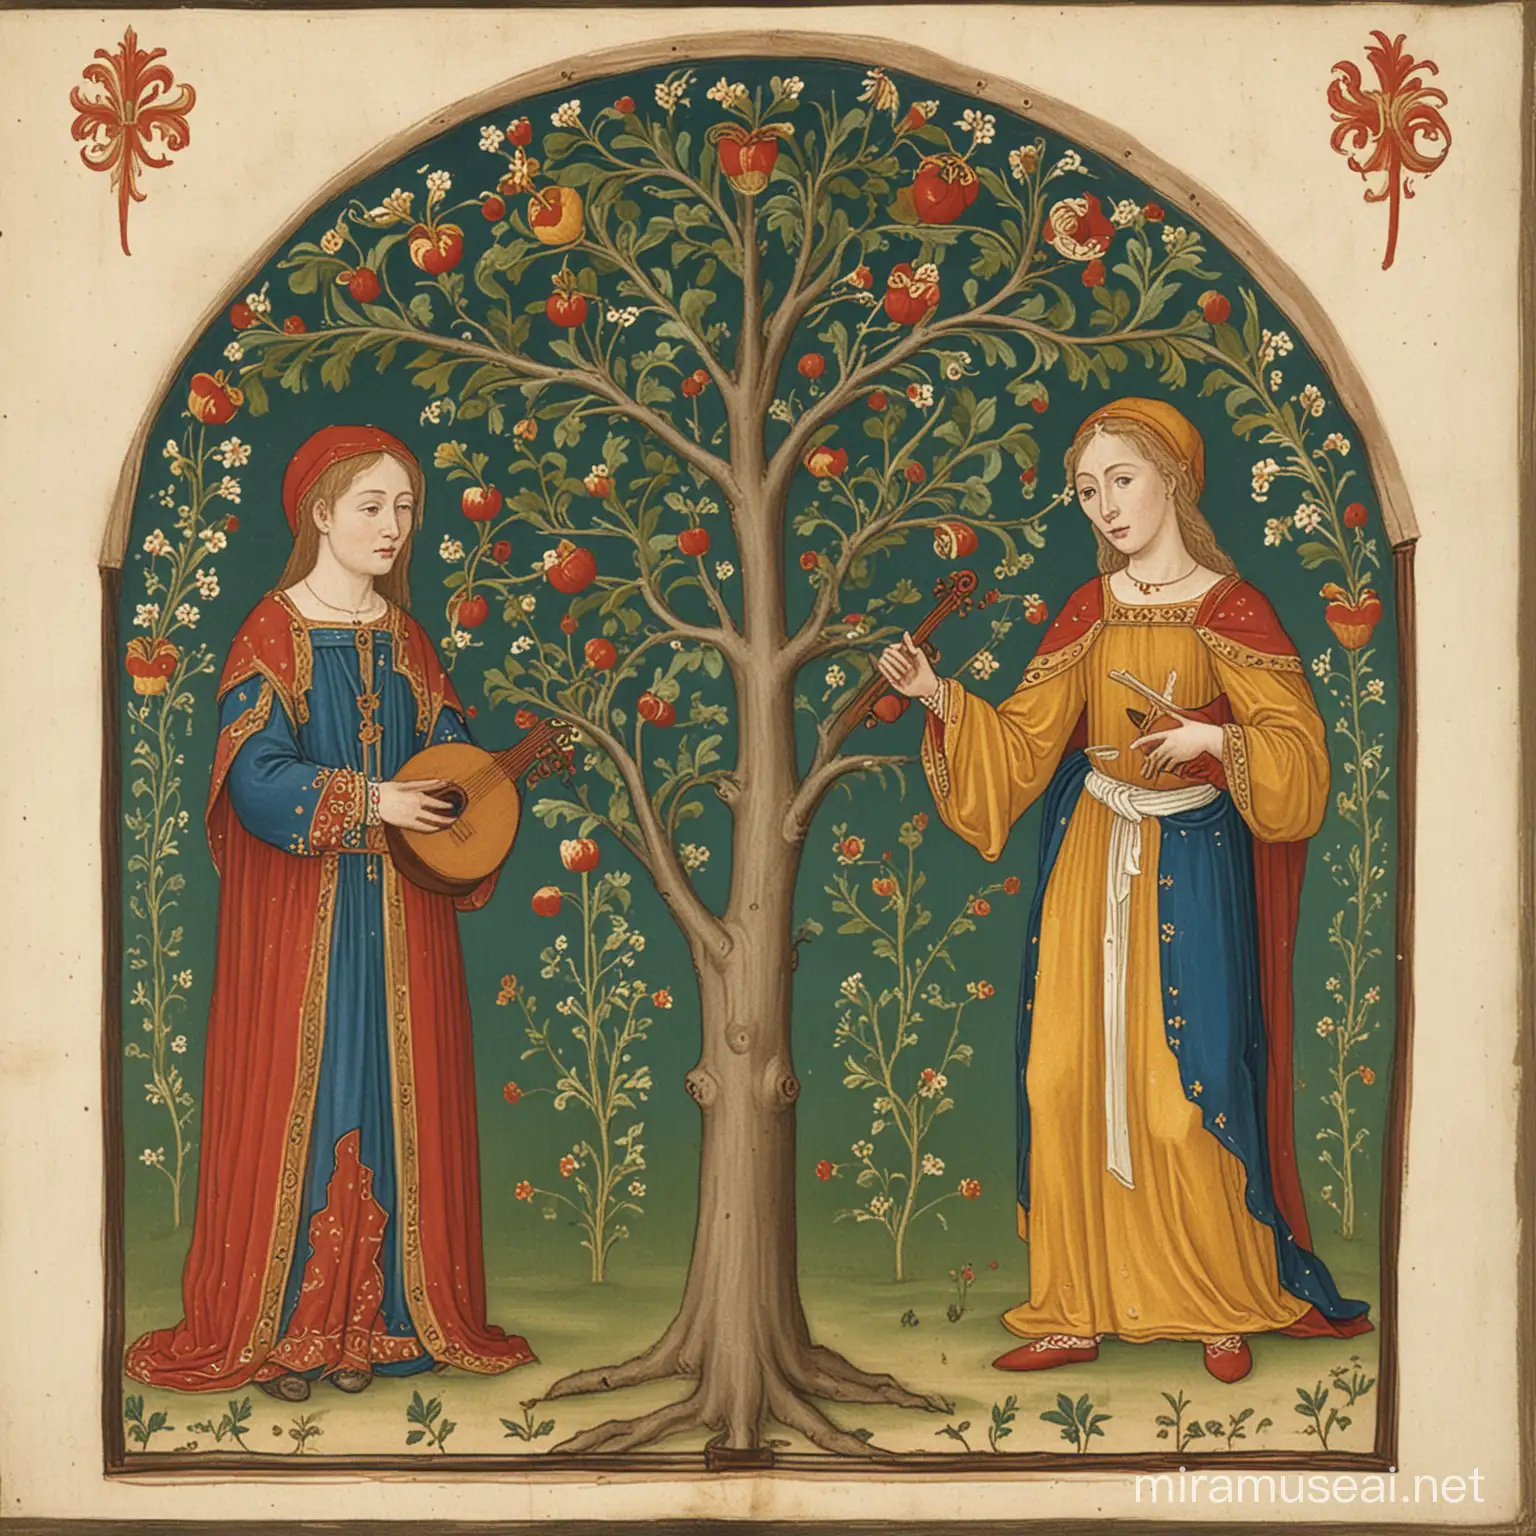 Two Medieval Musicians Performing by a Fig Tree in Codex Manesse Style